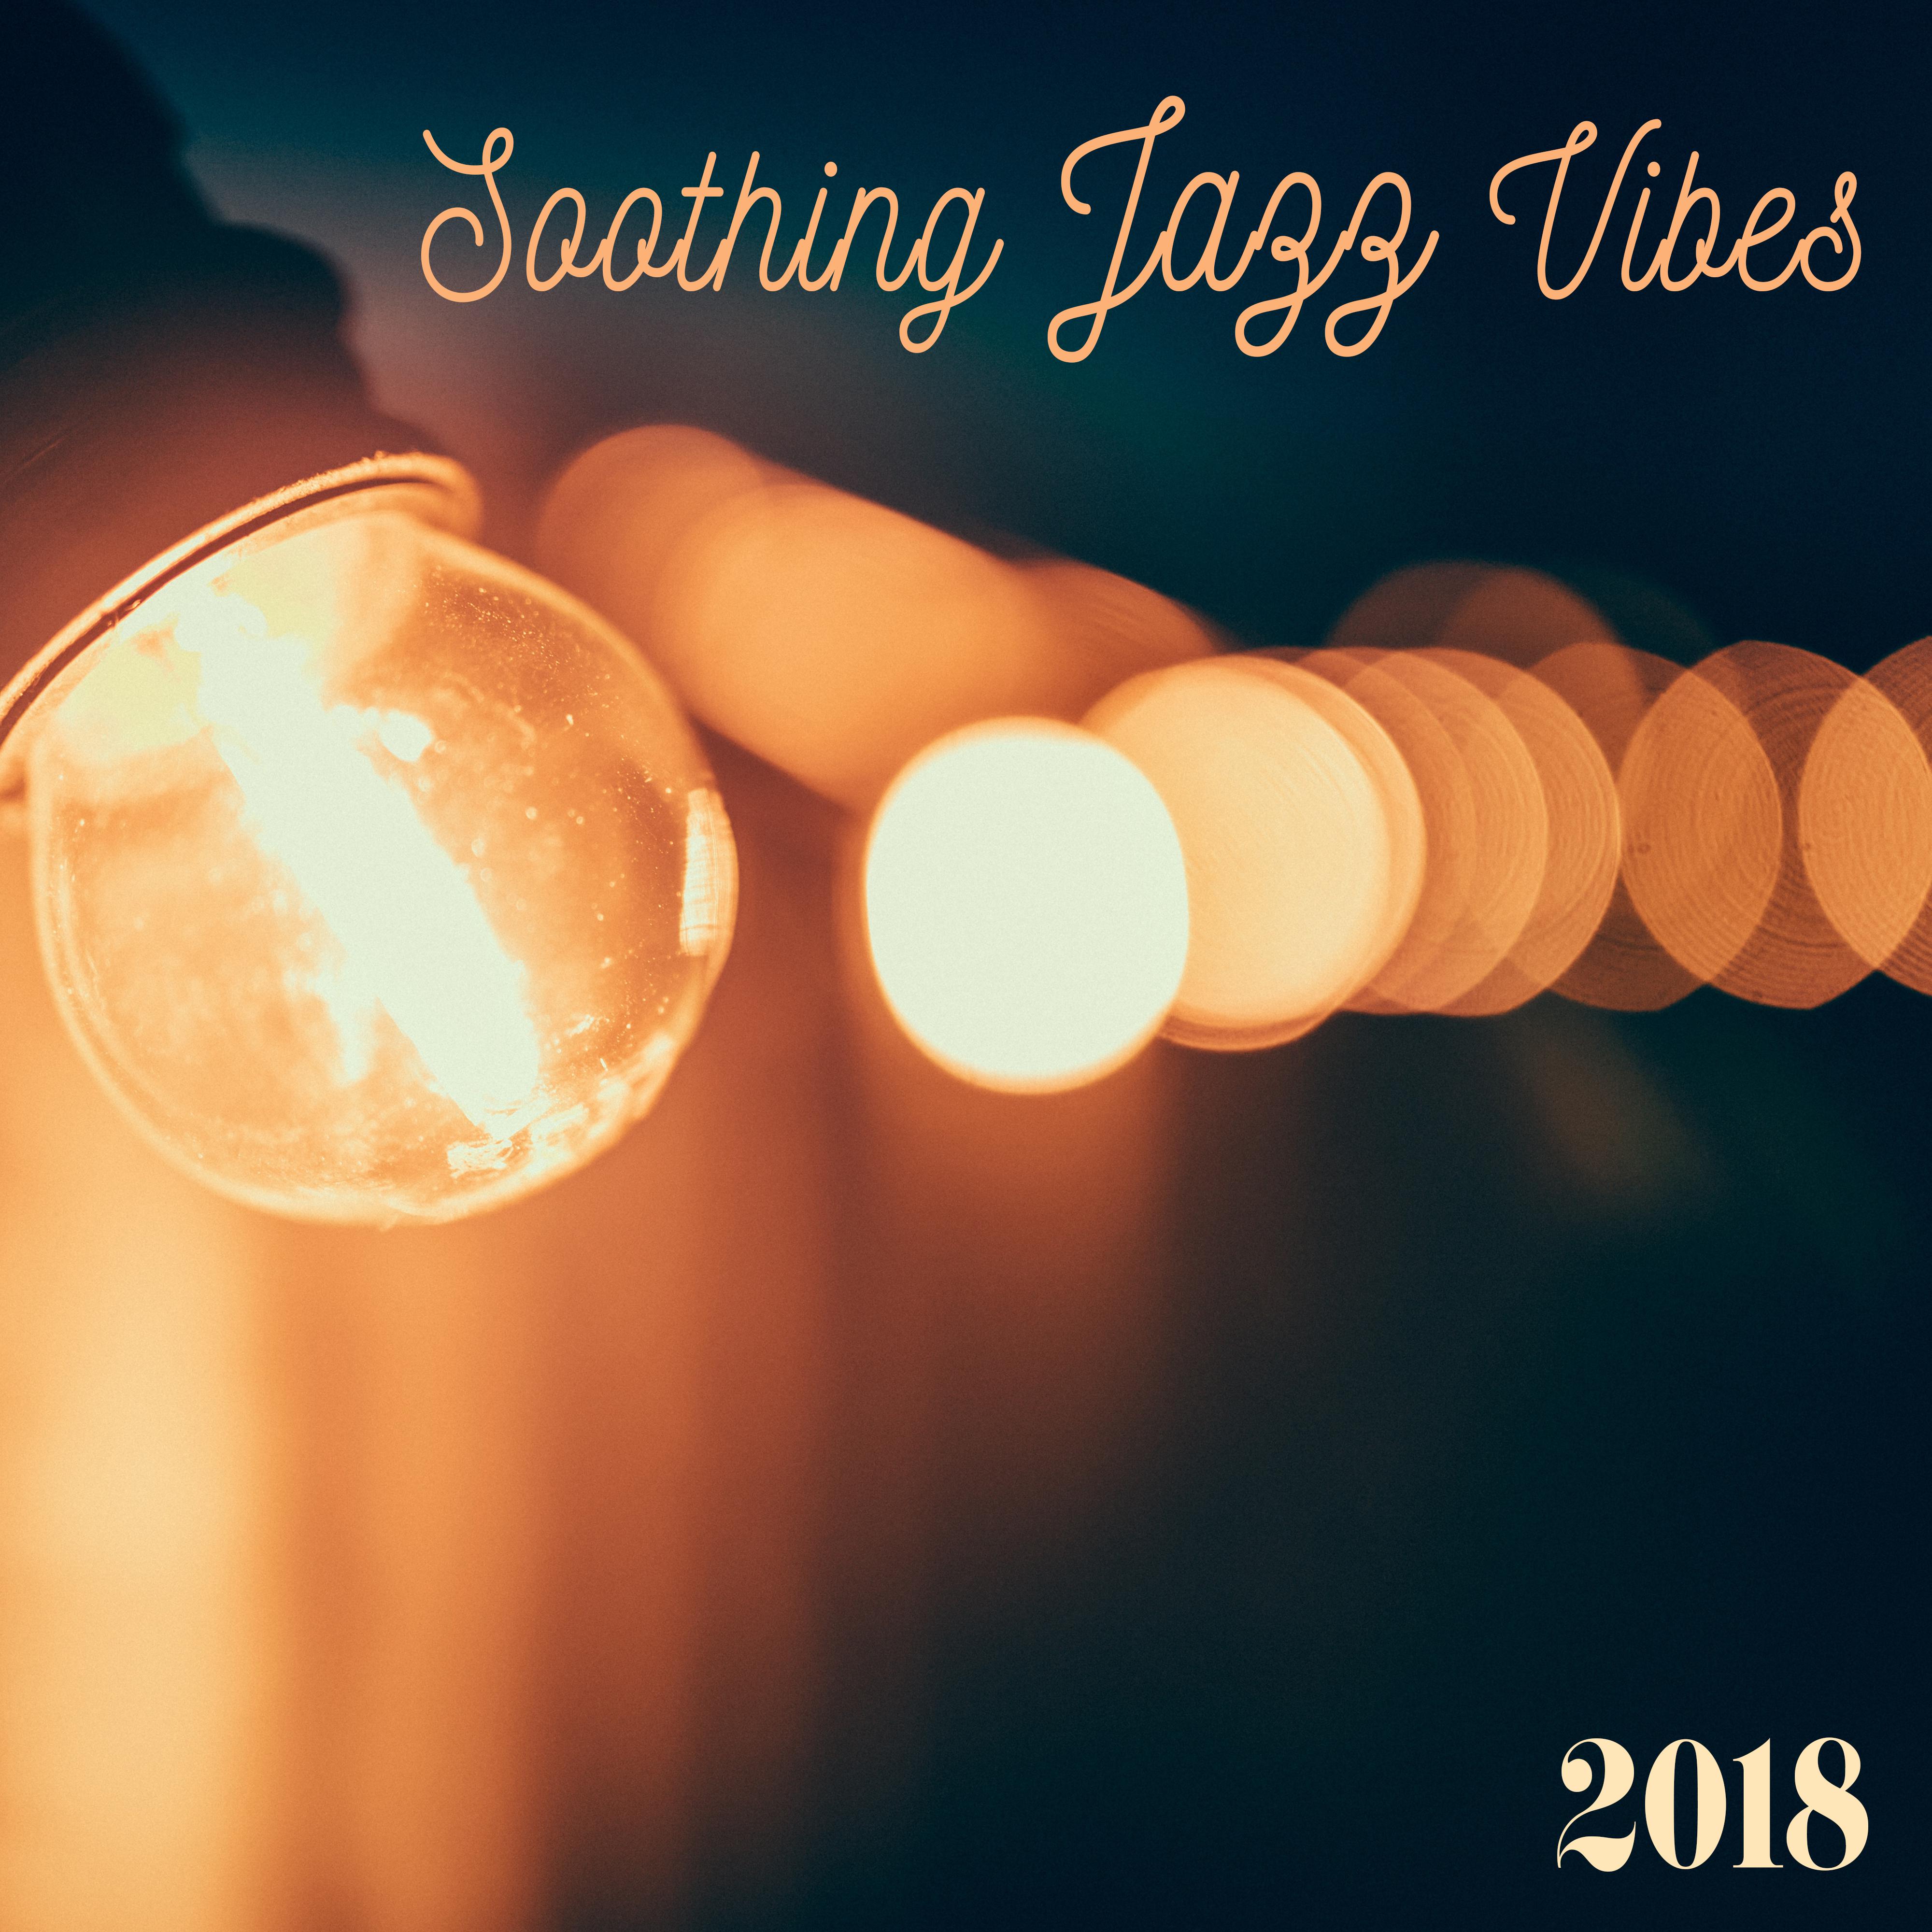 Soothing Jazz Vibes 2018